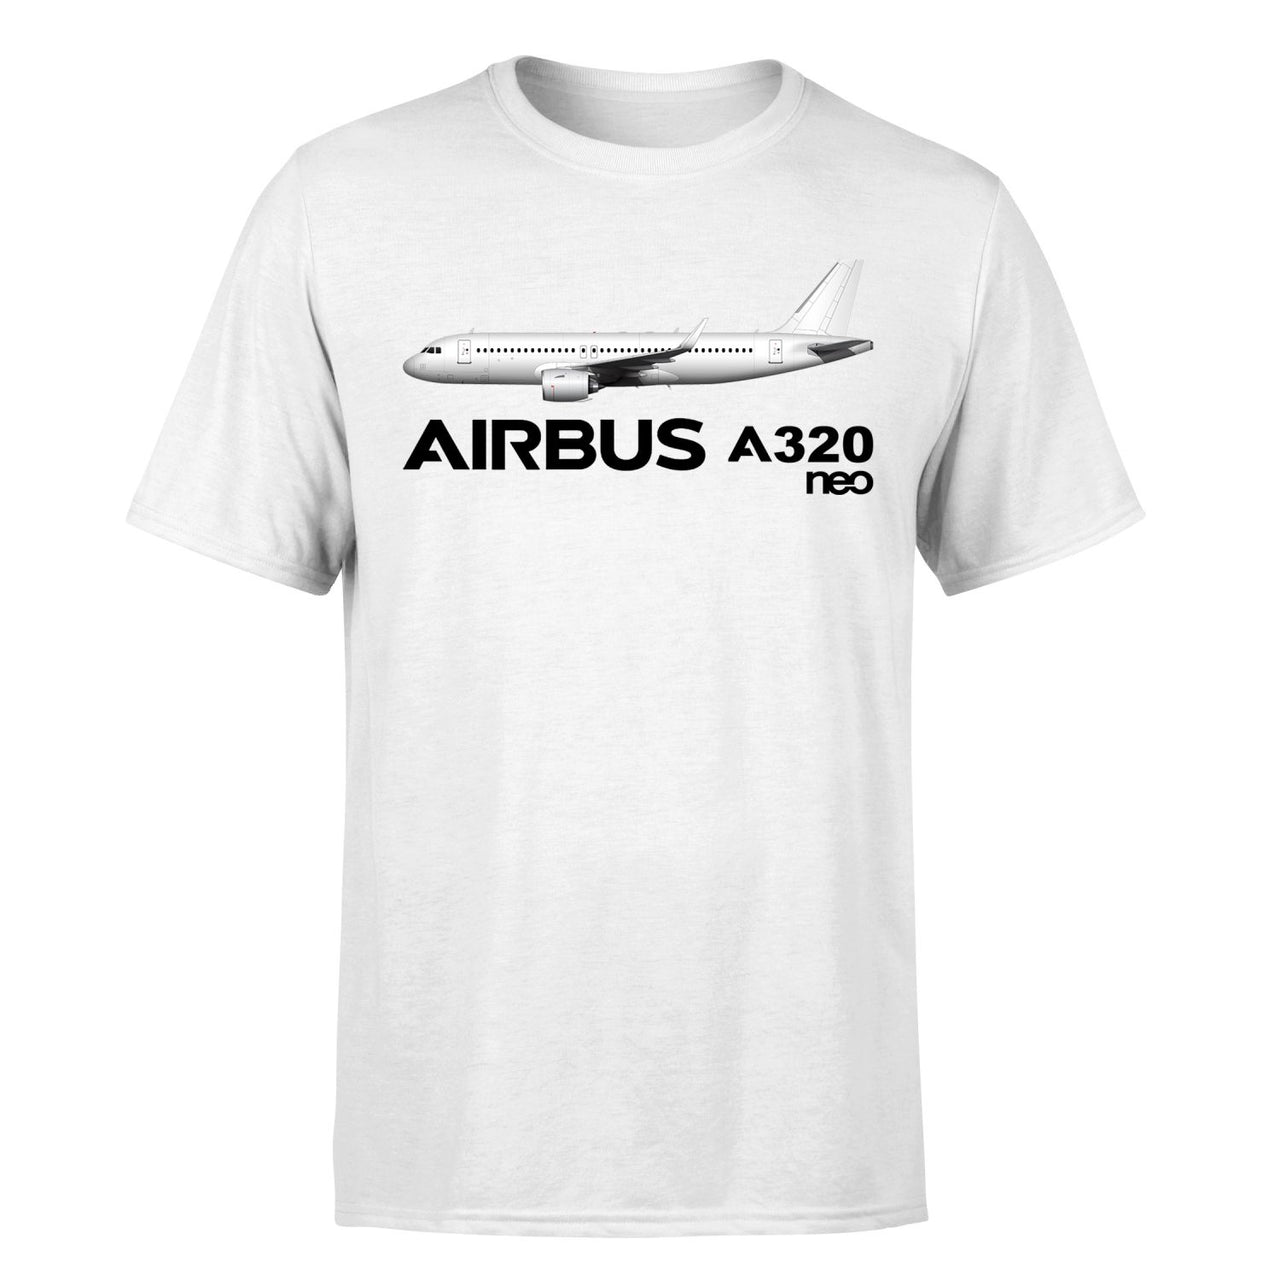 The Airbus A320Neo Designed T-Shirts